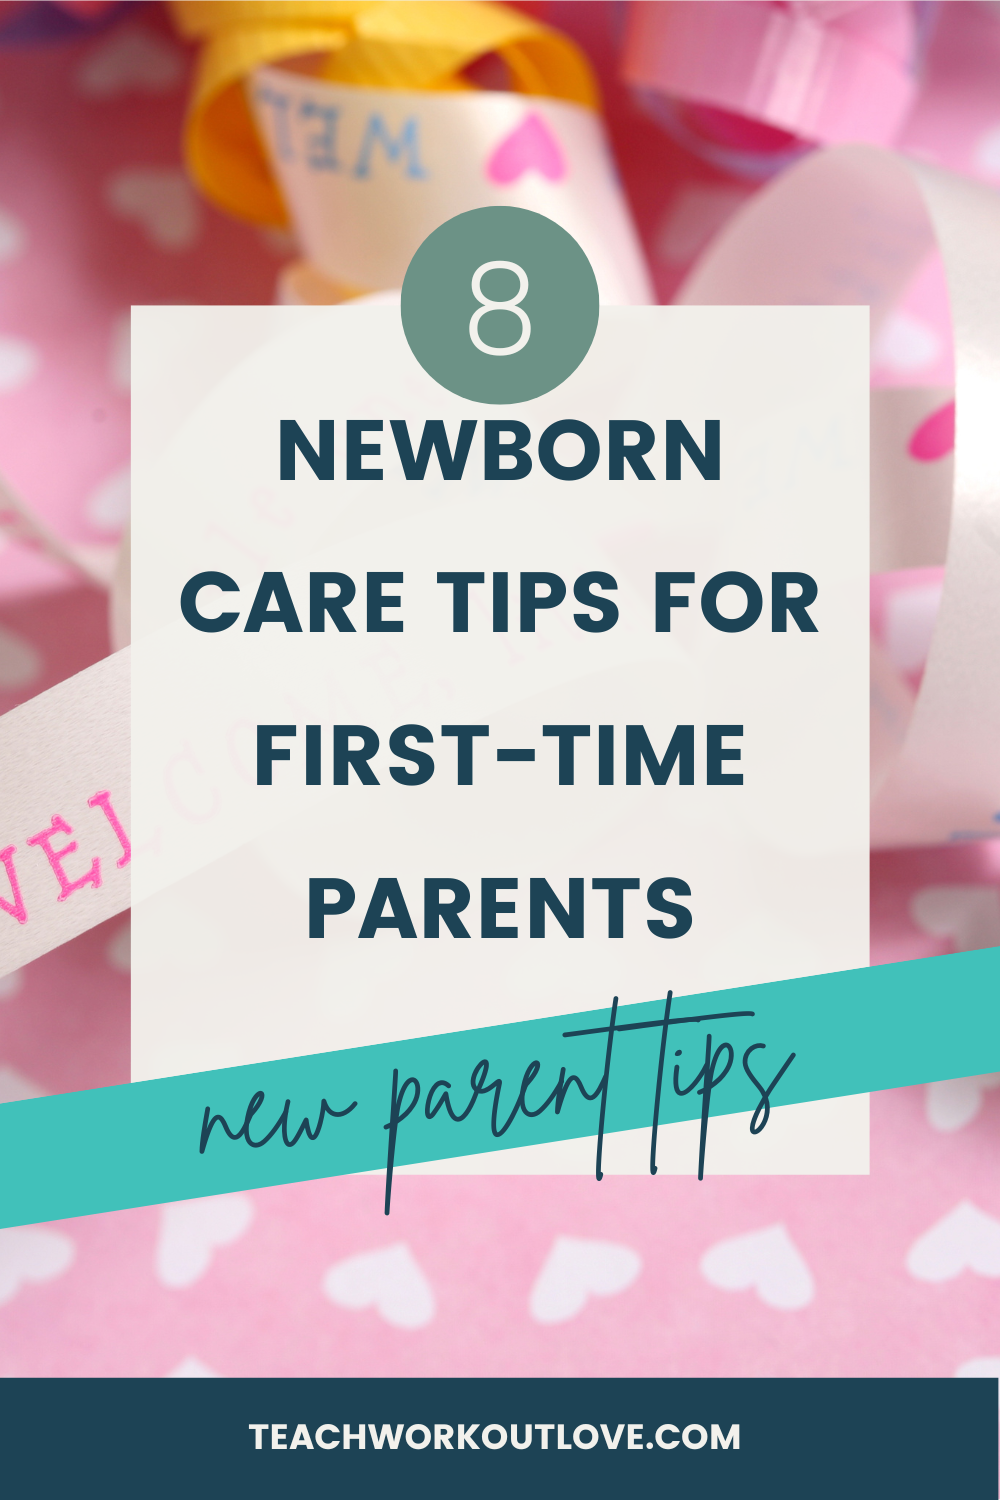 If you’re expecting your first baby (or your newborn is already here!), you’ll get a lot of advice from well-meaning people about how to deal with those early, sleepless weeks of parenthood. It can get a little overwhelming, so just try to keep things simple and remember that your only job is simply to keep you and your baby safe and healthy. Here are some care tips for those first few weeks.